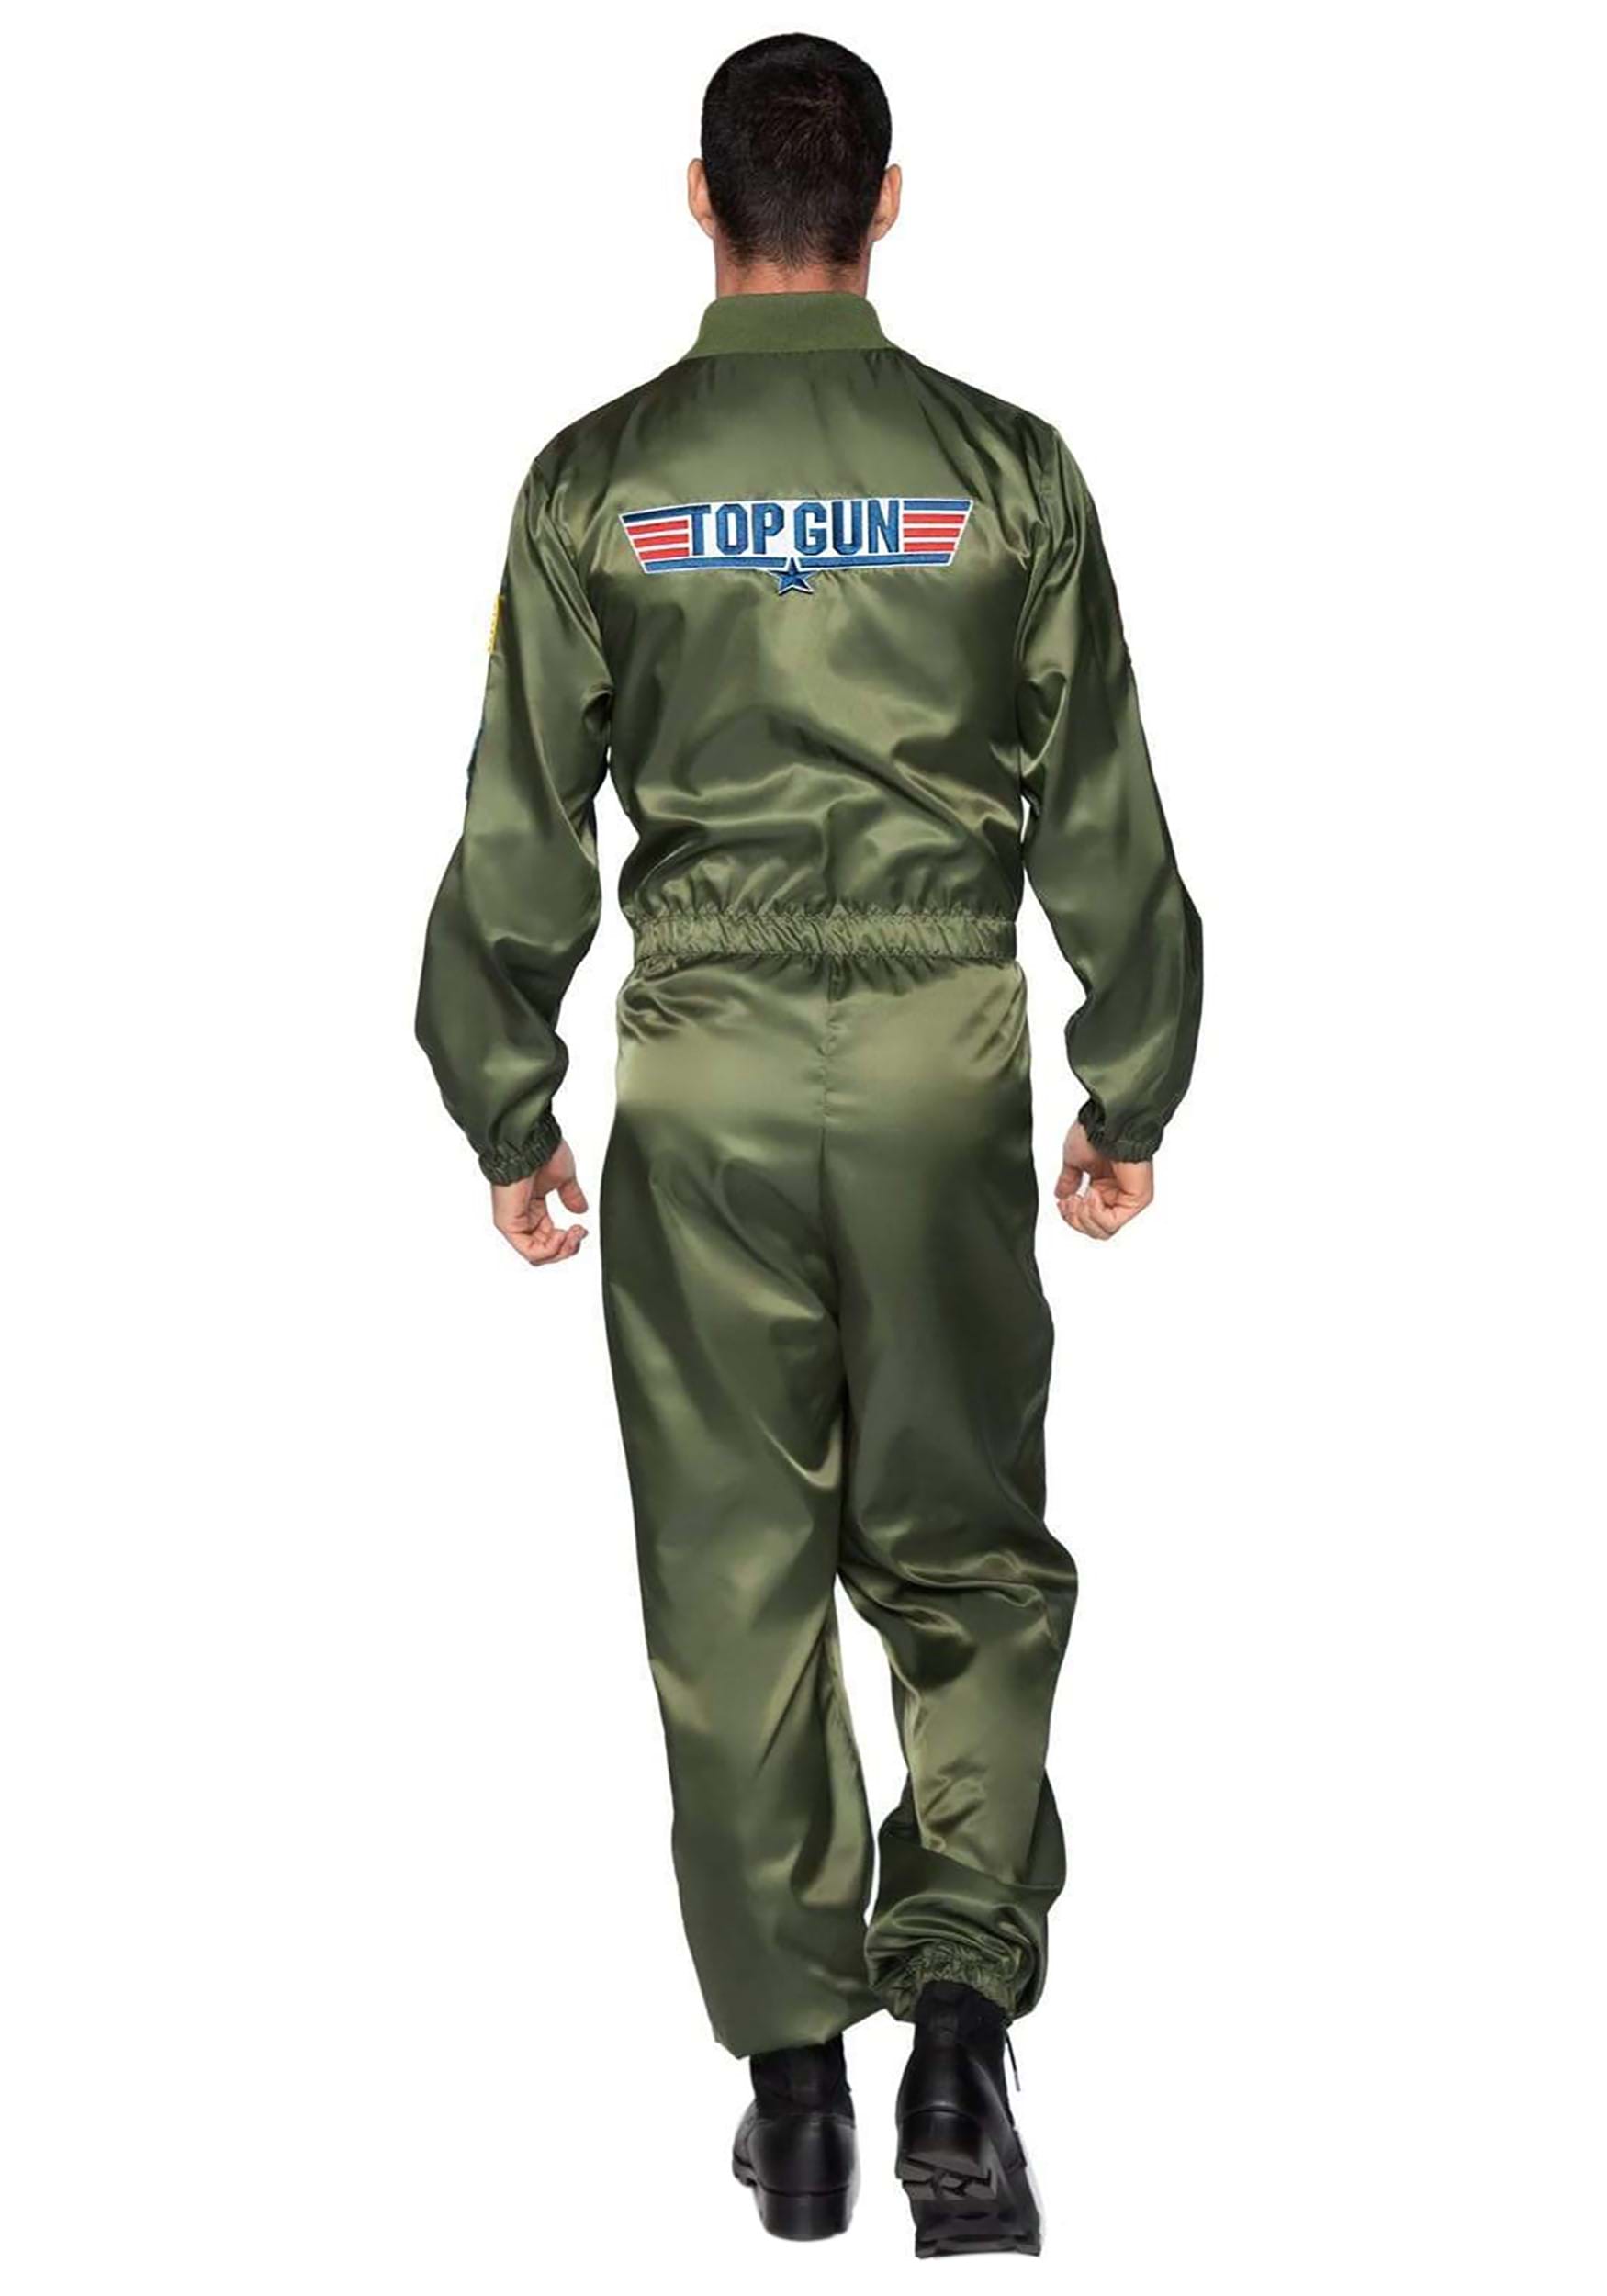 Buy Maverick Flight Suit Pilot Costume Halloween Cosplay For Kids Boys-M  Online at Low Prices in India - Amazon.in